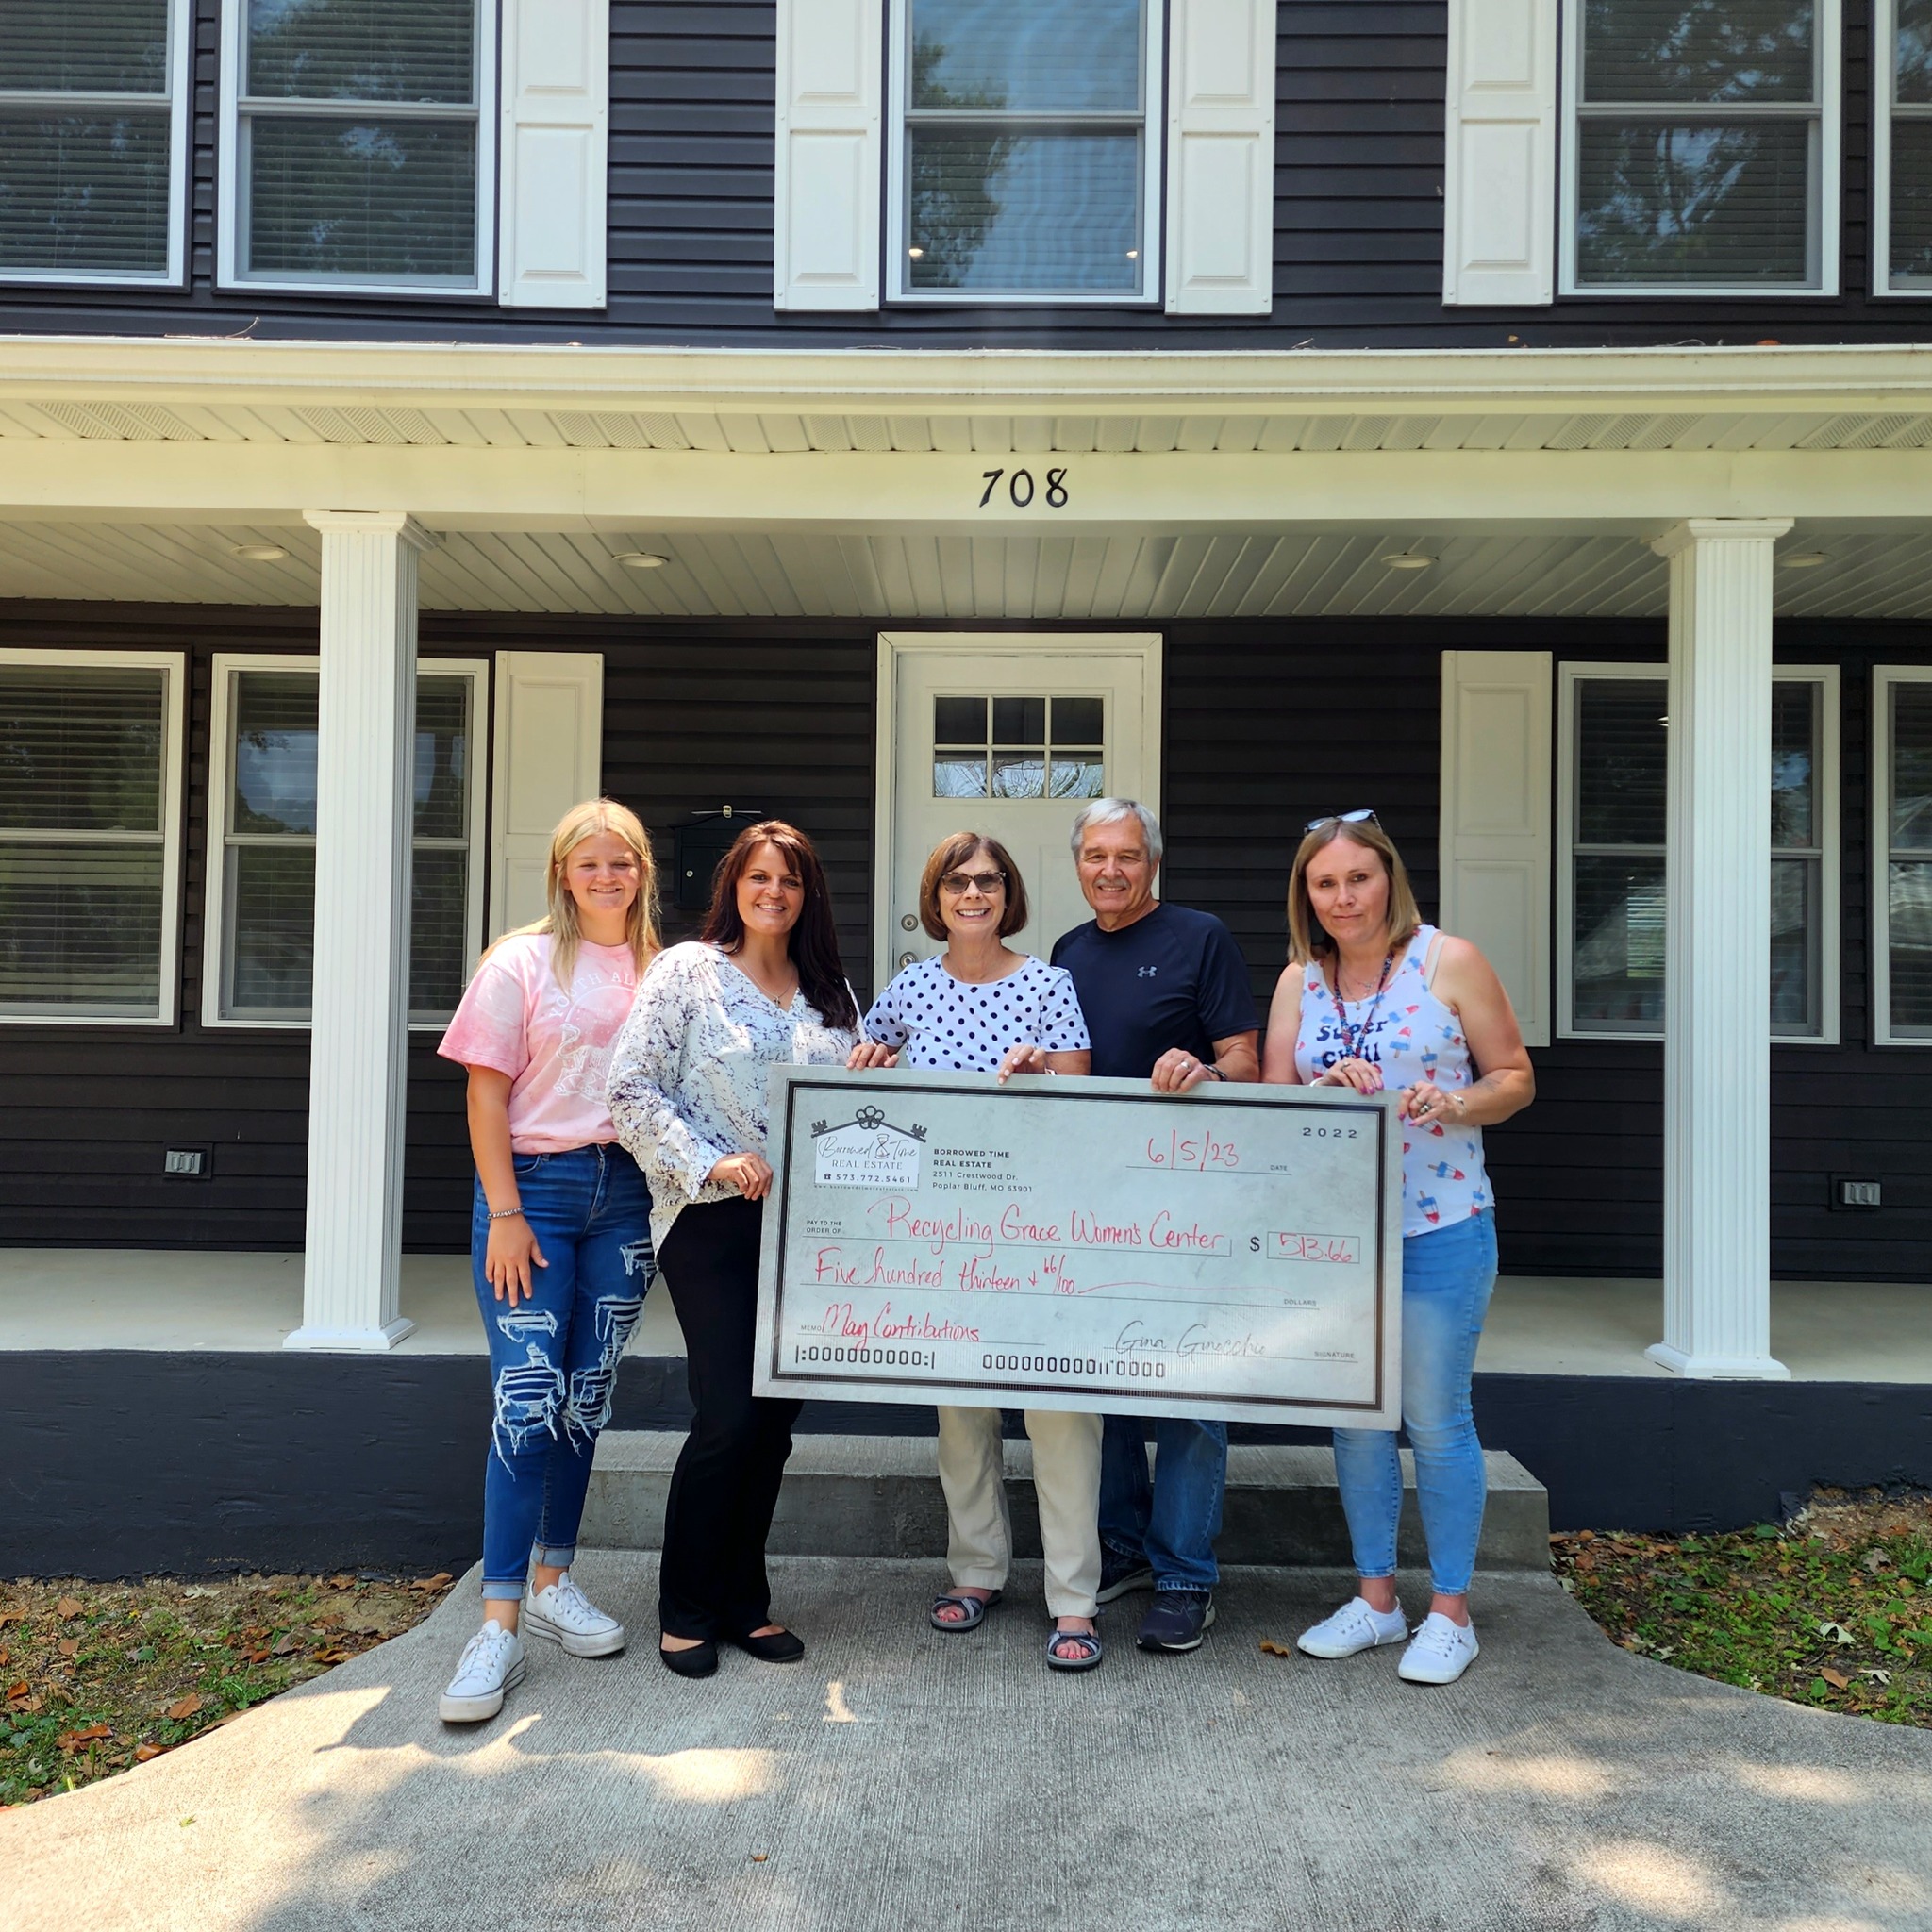 Gina Ginocchio and Hope Hunter presenting donation check to Sandra Mick-Shockey, Brent Shockey and Mitzi Moss at their newest recovery addition, the Ruth House.